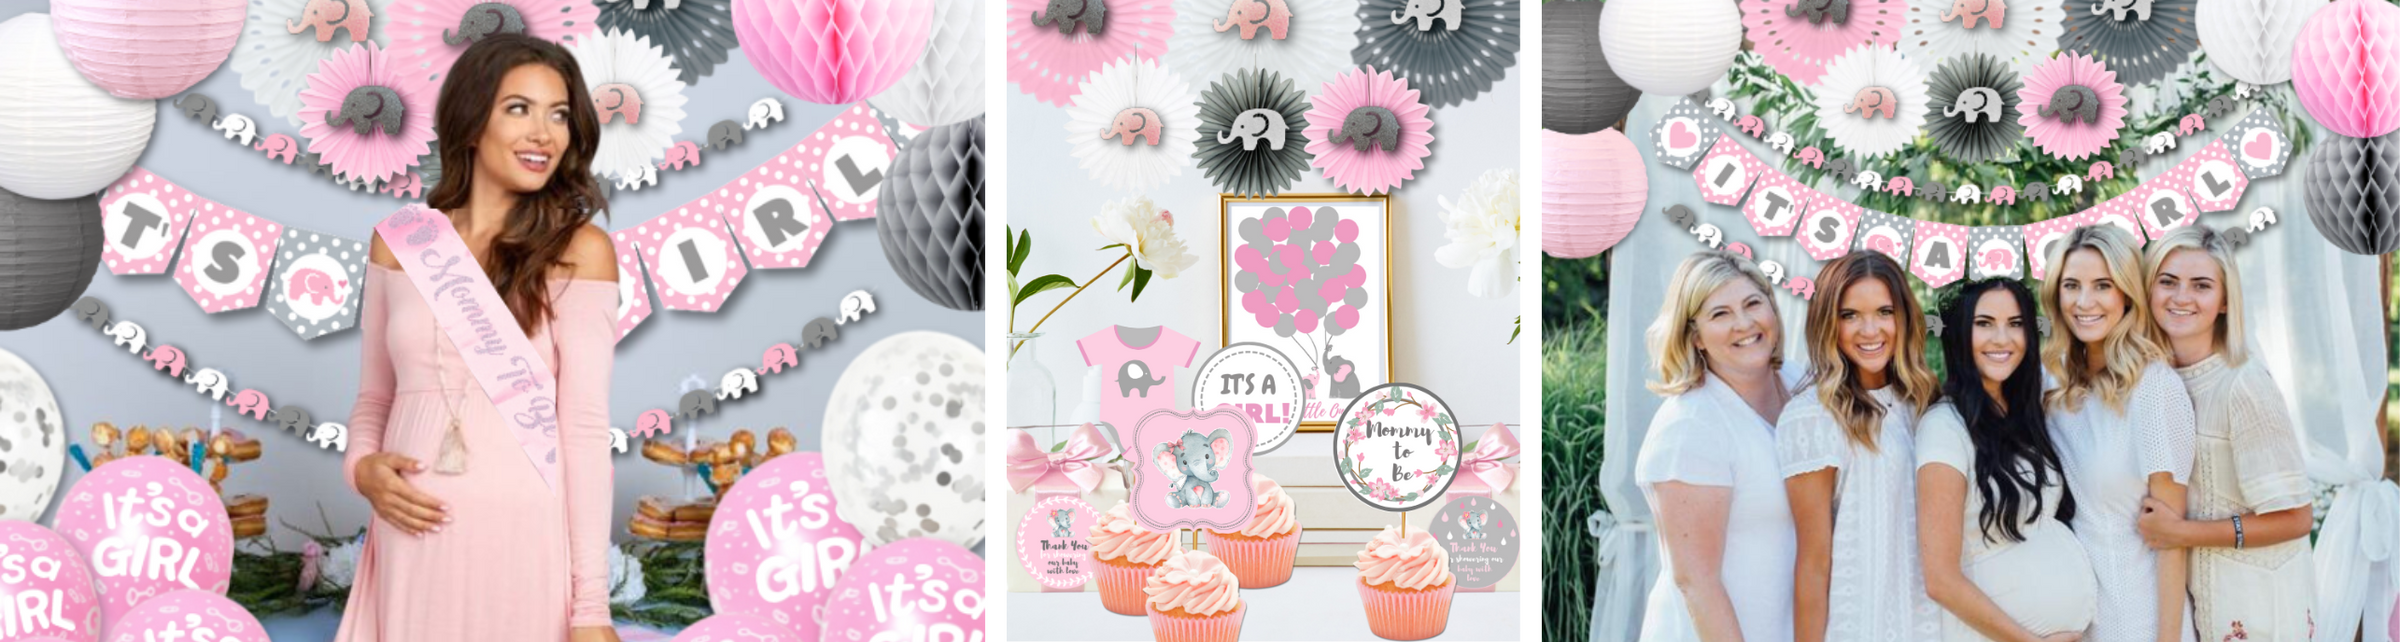 How to Plan an Elephant Girl Baby Shower Using Our Set - Step by Step